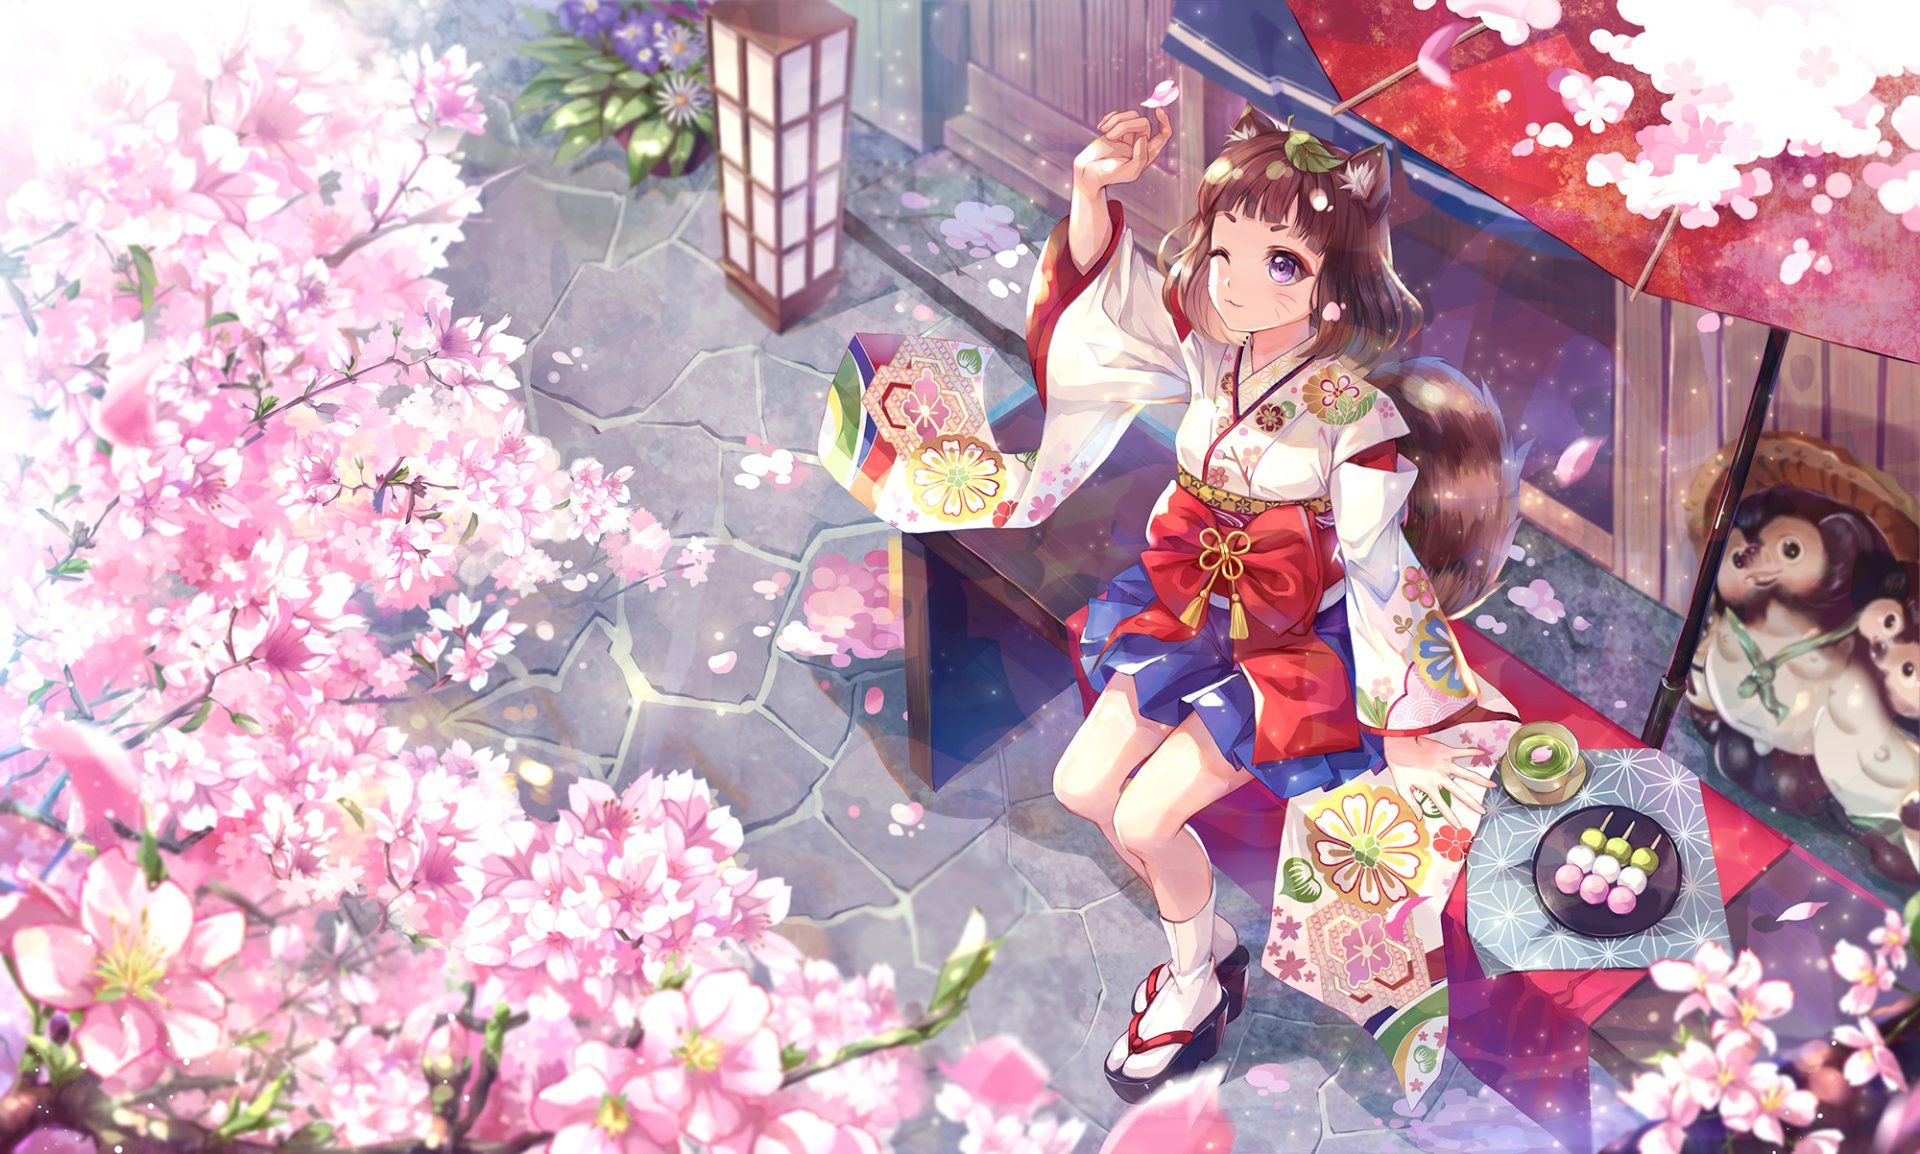 Original Wallpaper Background Image. View, download, comment, and rate Abys. Anime cherry blossom, Anime wallpaper, Cherry blossom wallpaper